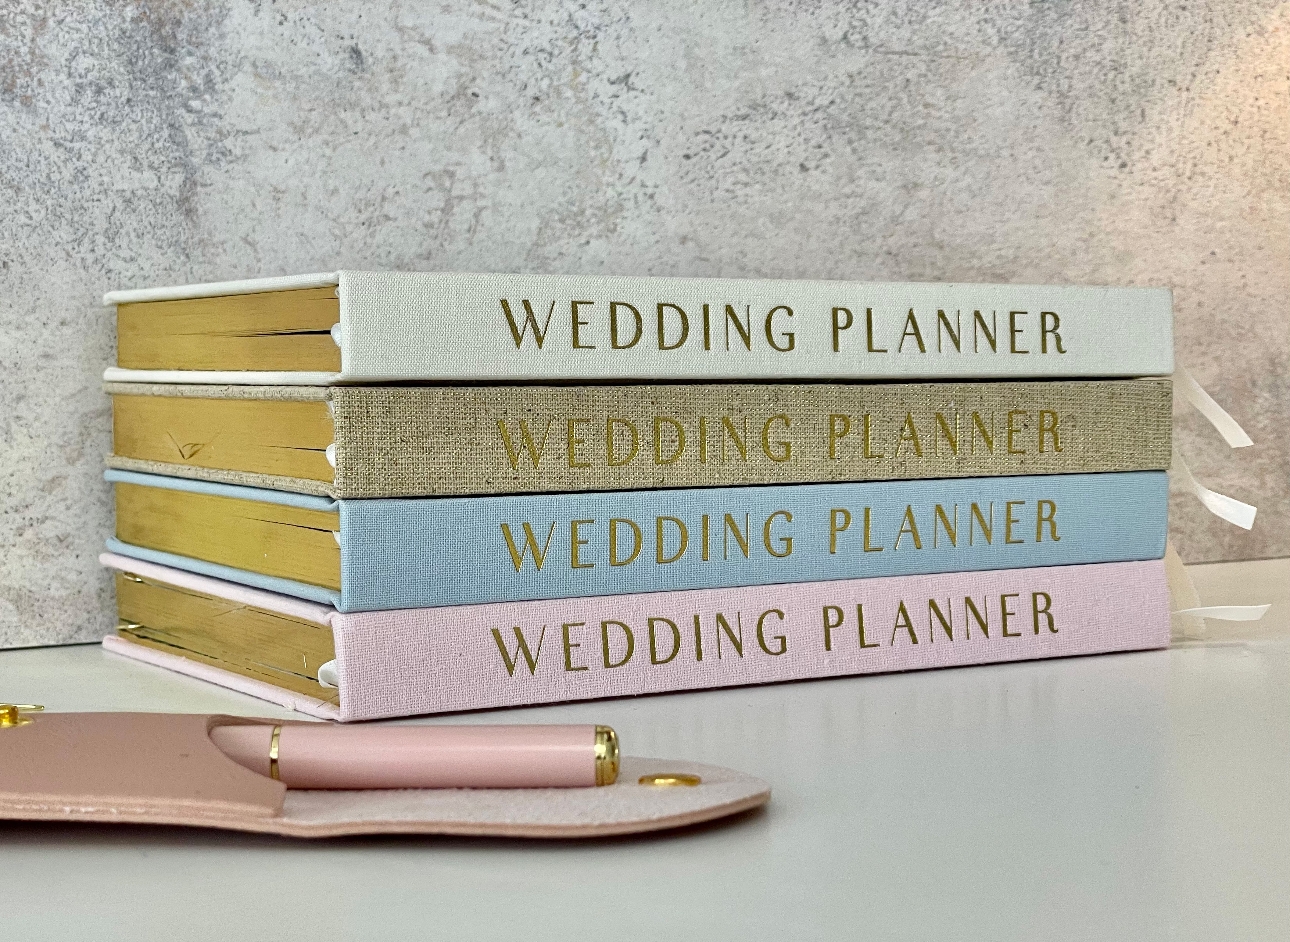 New Wedding Planners in four colours piled up